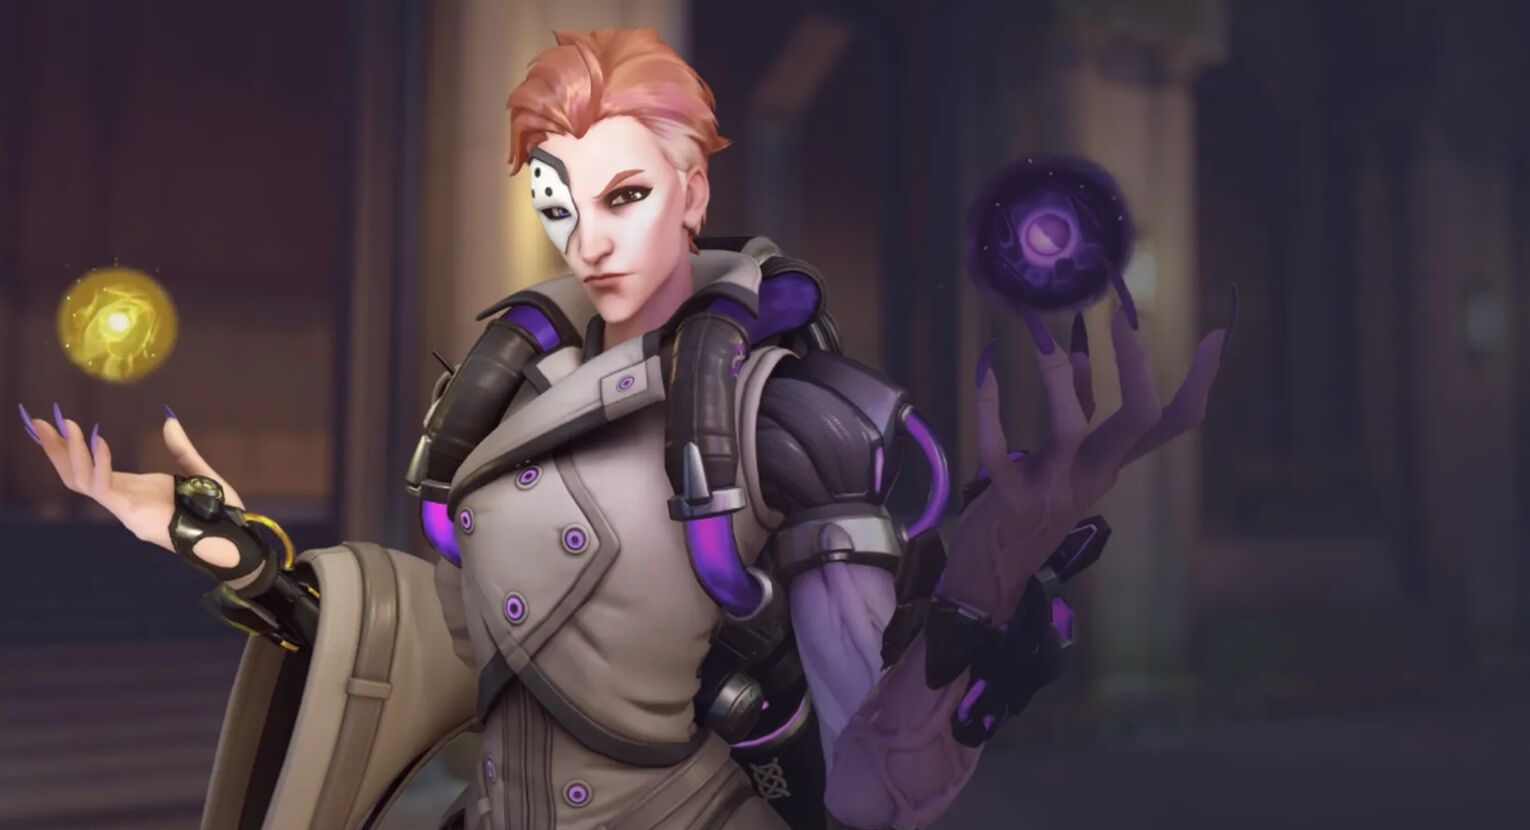 Moira as Counter for Pharah in Overwatch 2